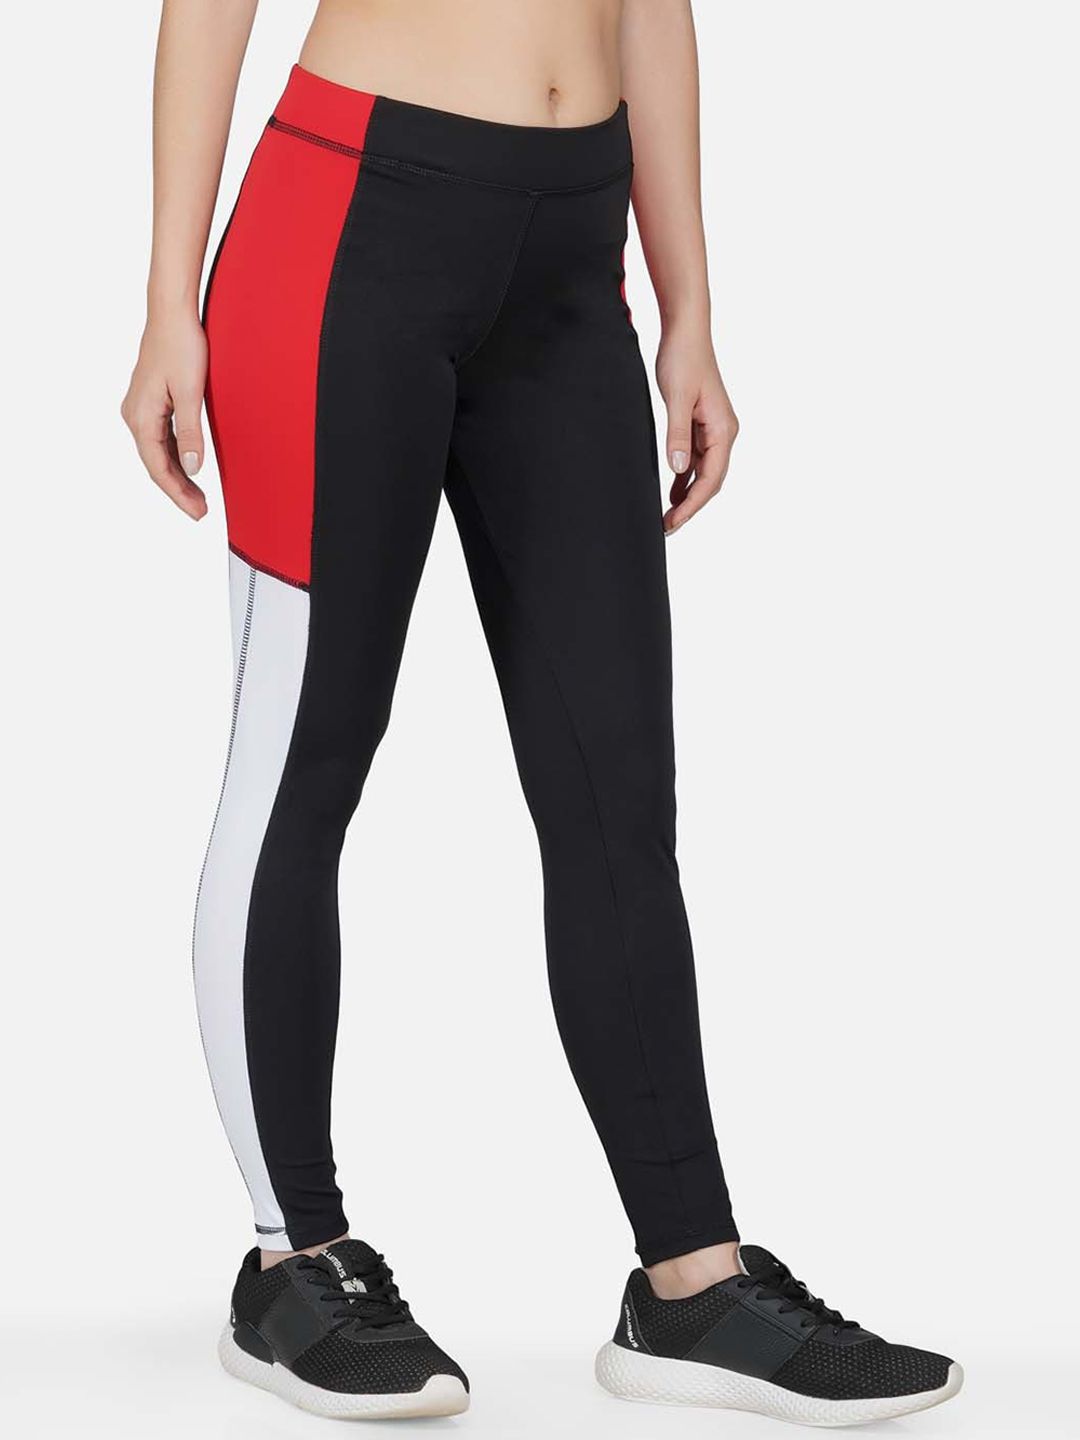 NEU LOOK FASHION Women Black & Red Colourblocked Slim-Fit Tights Price in India